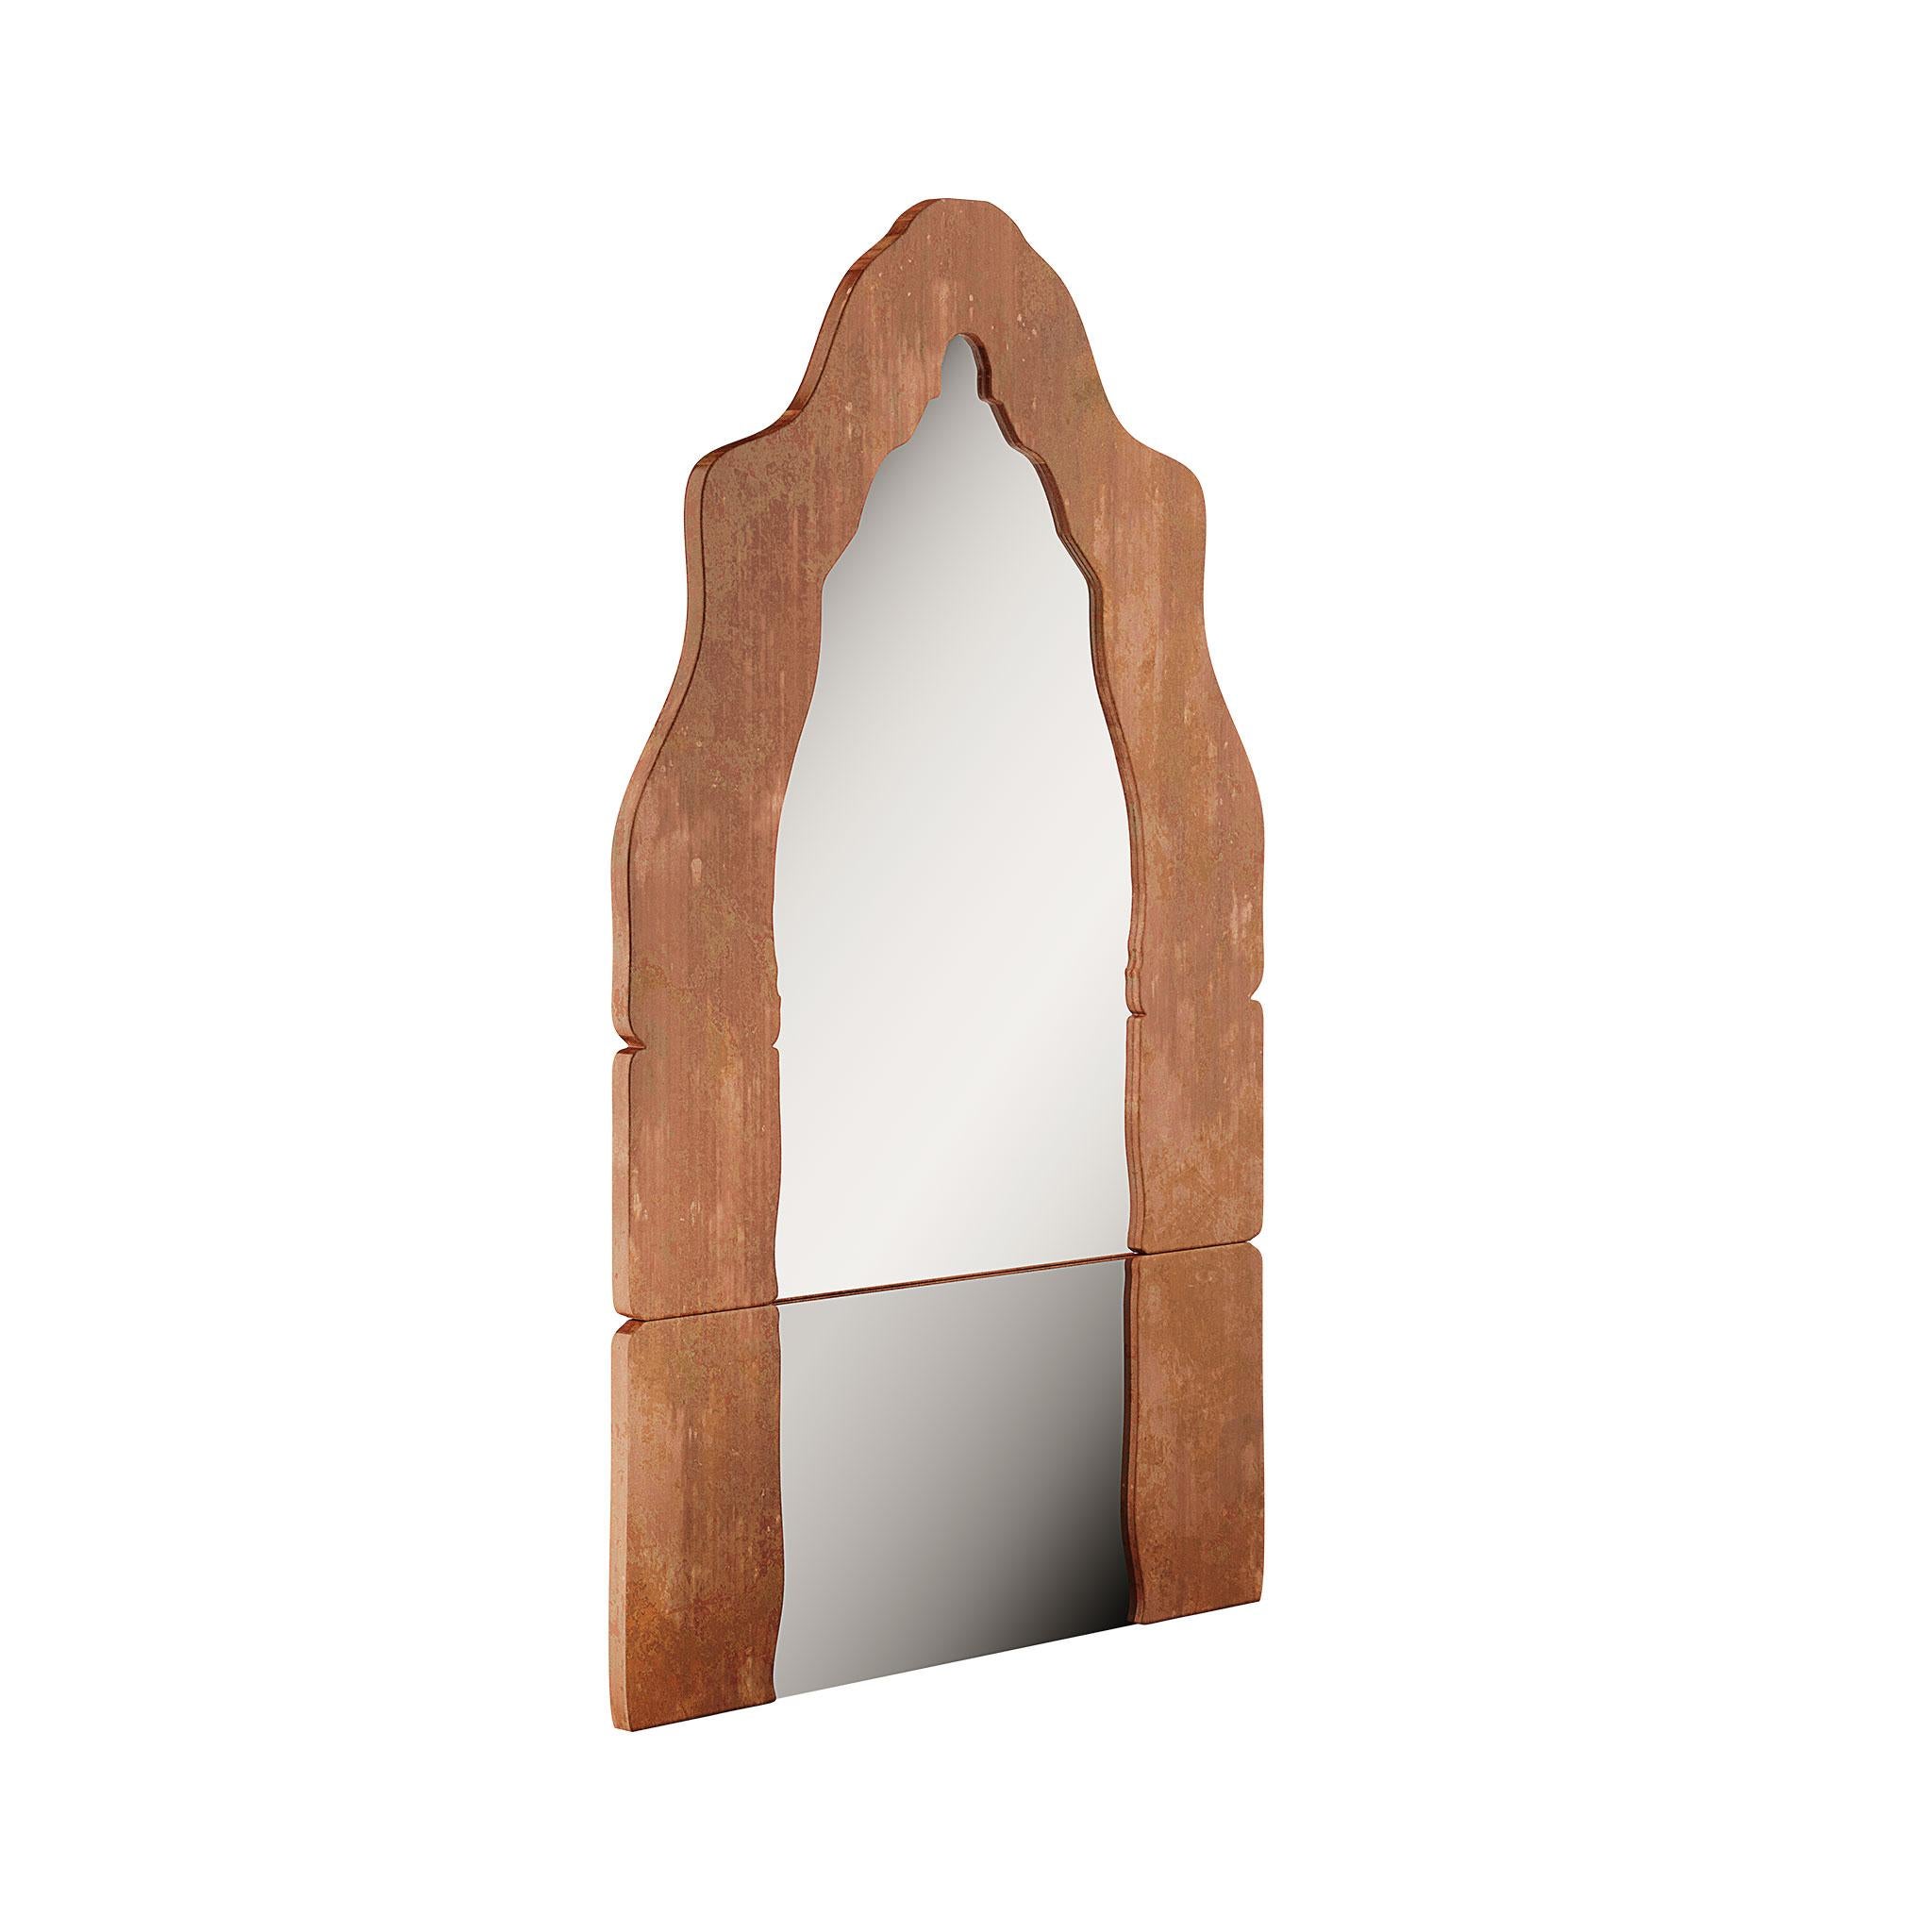 Introduce a unique and commanding piece into your decor with our Contemporary Brutalist Mirror in Rust Matte Effect Lacquer meticulously hand-carved. This mirror is not just a functional item but an artistic expression that combines brutalist style